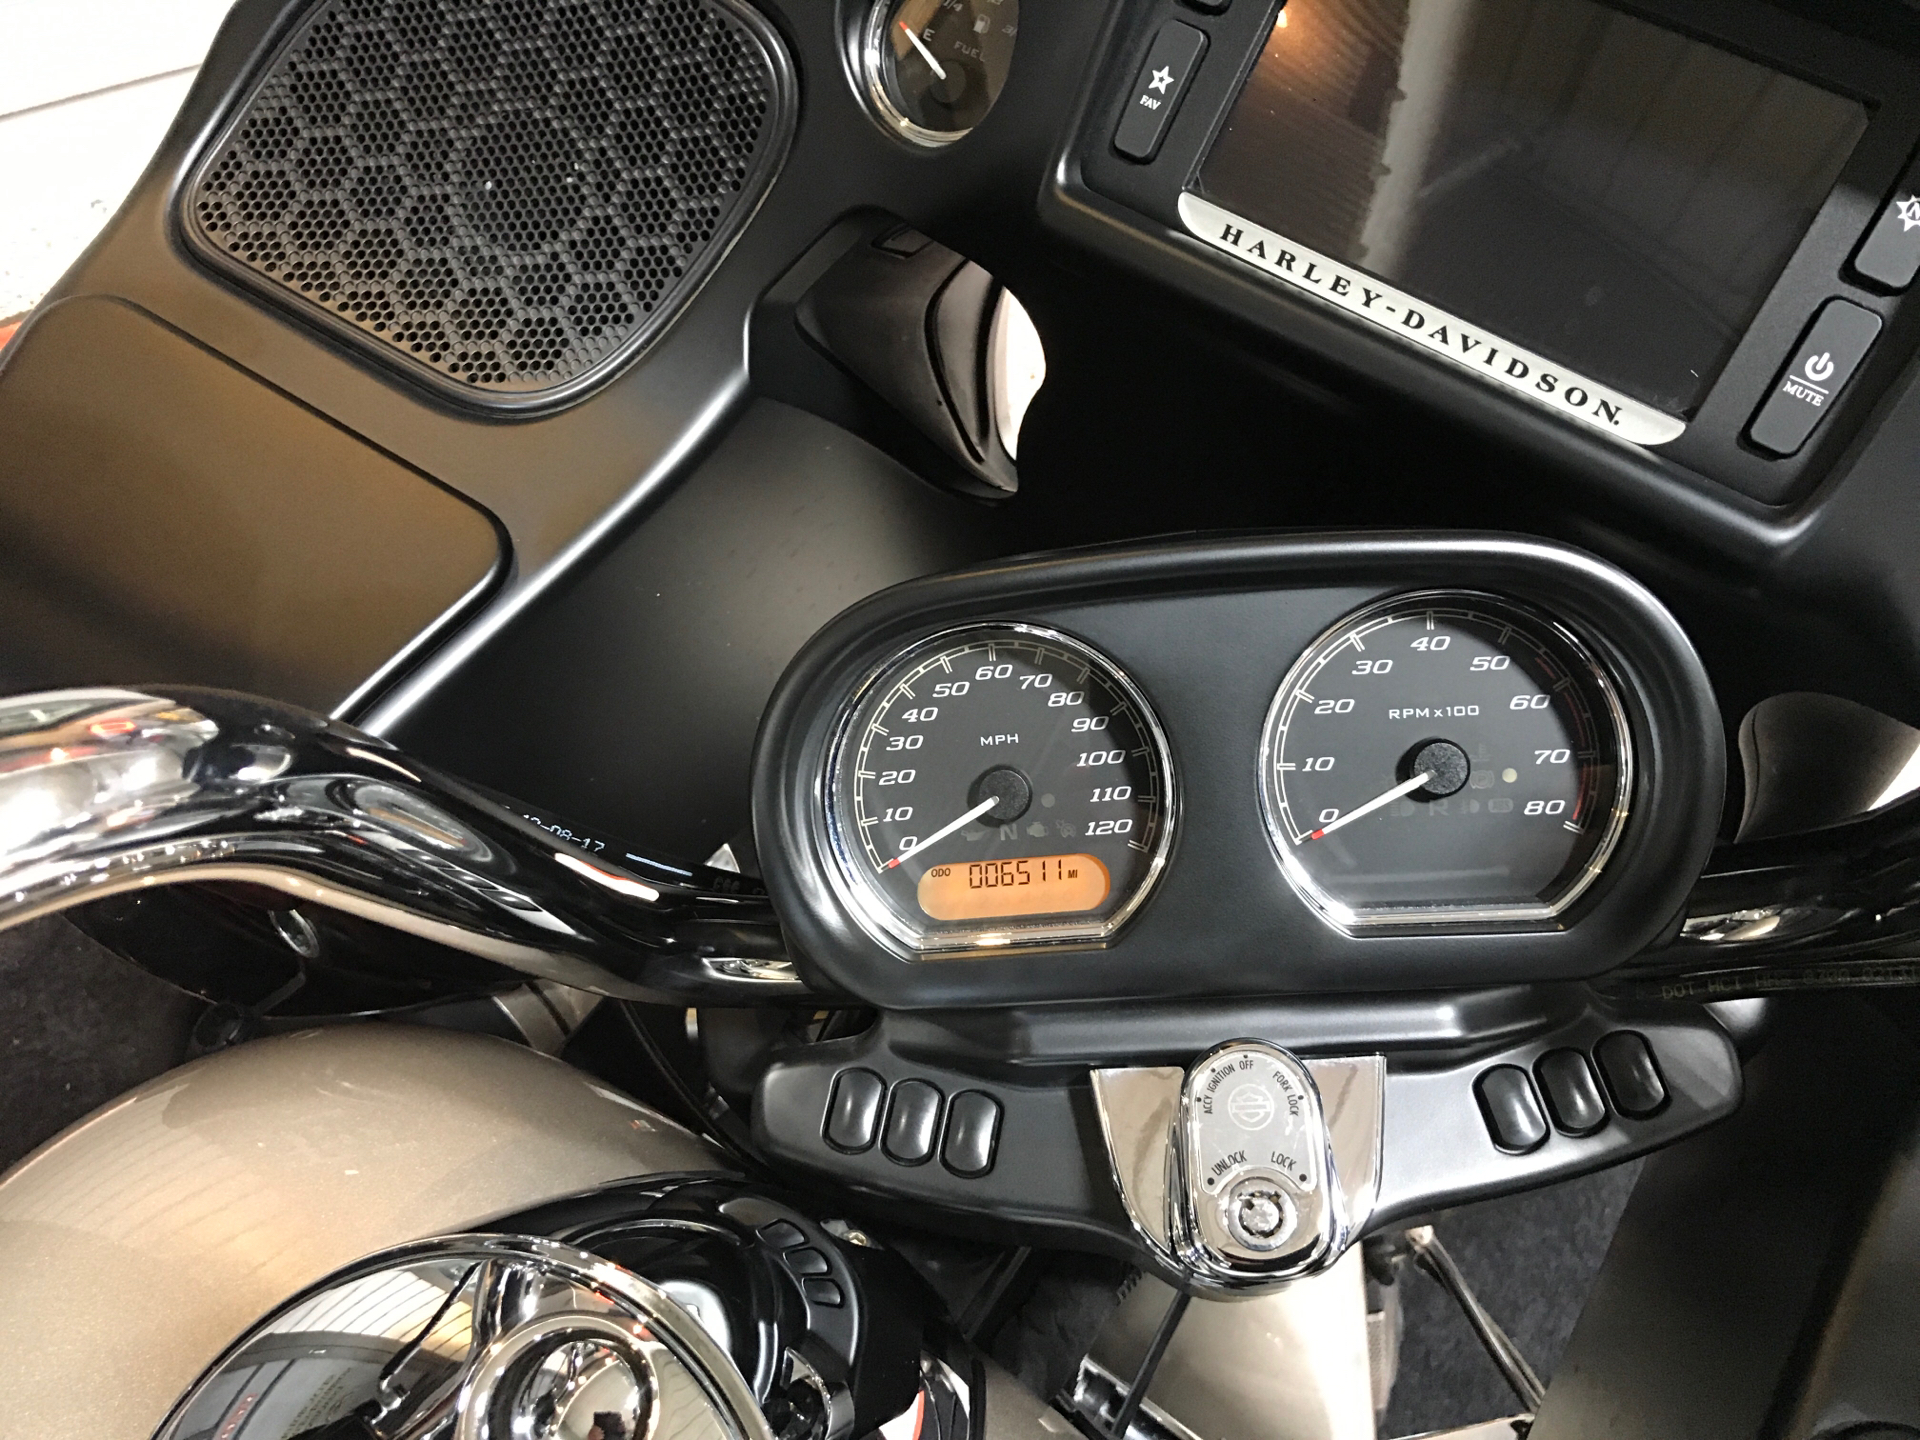 2018 Harley-Davidson Road Glide® Ultra in Plainfield, Indiana - Photo 4